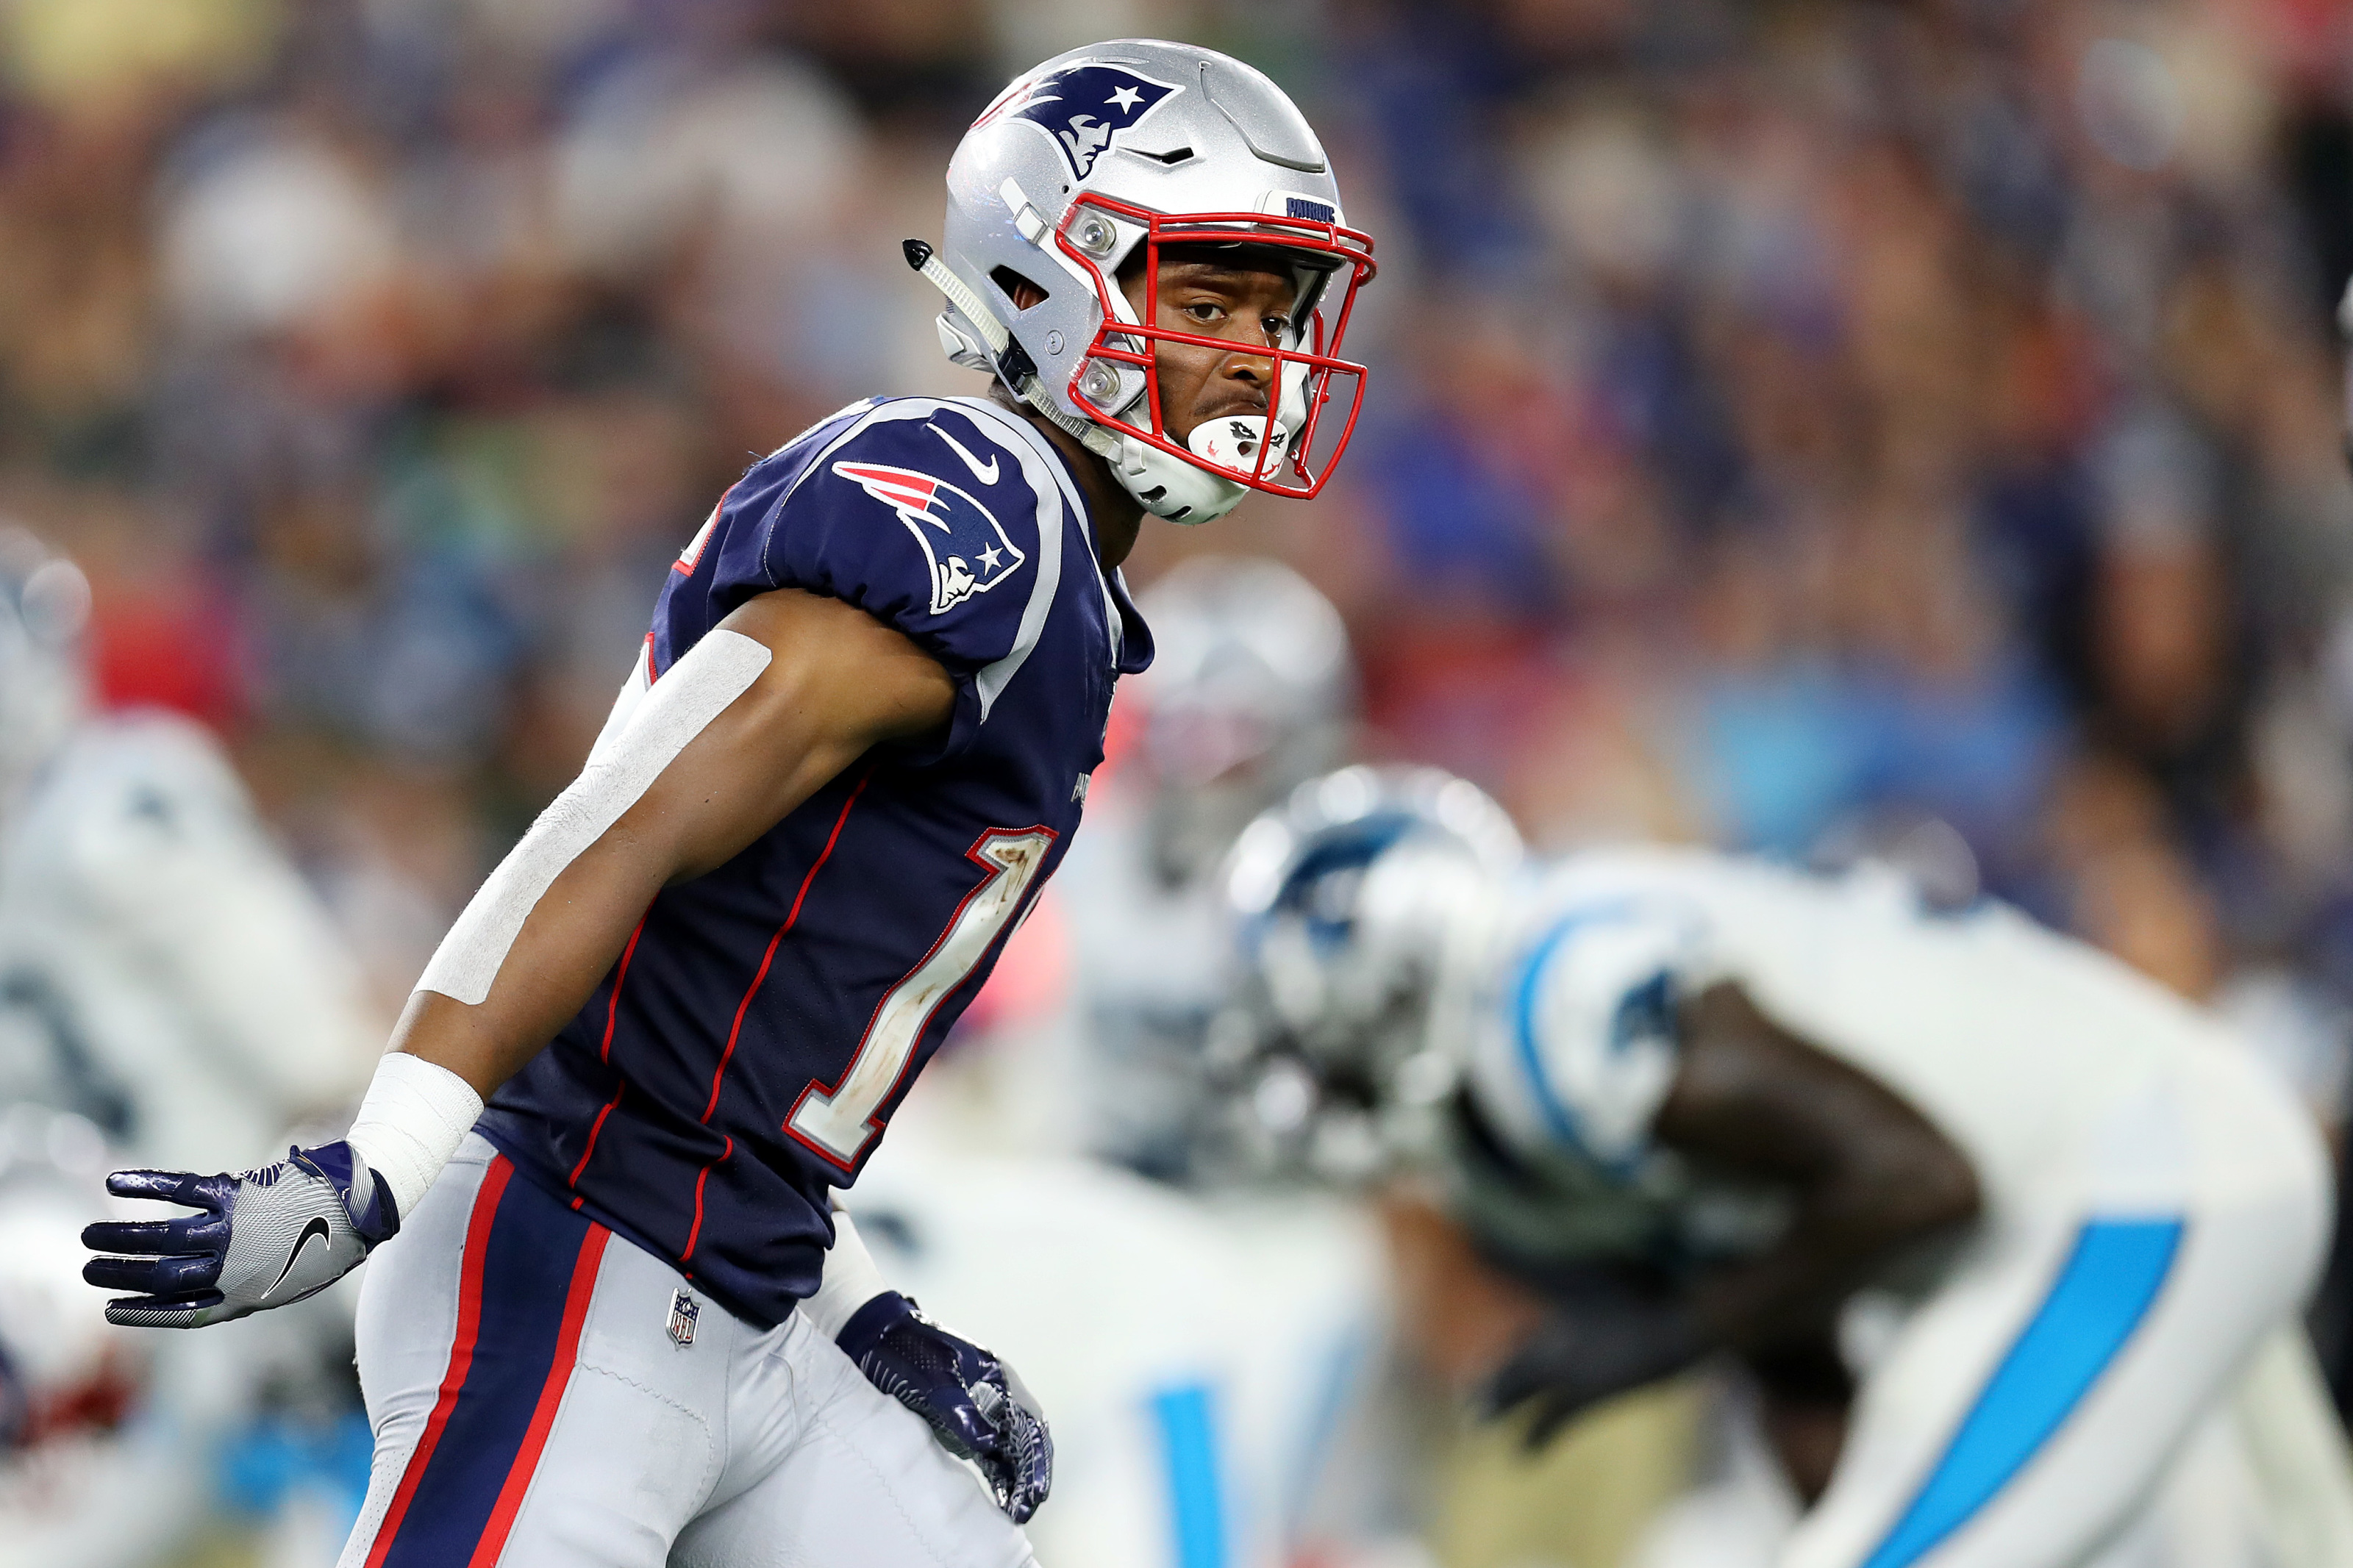 Jakobi Meyers poised to be featured weapon in Patriots offense